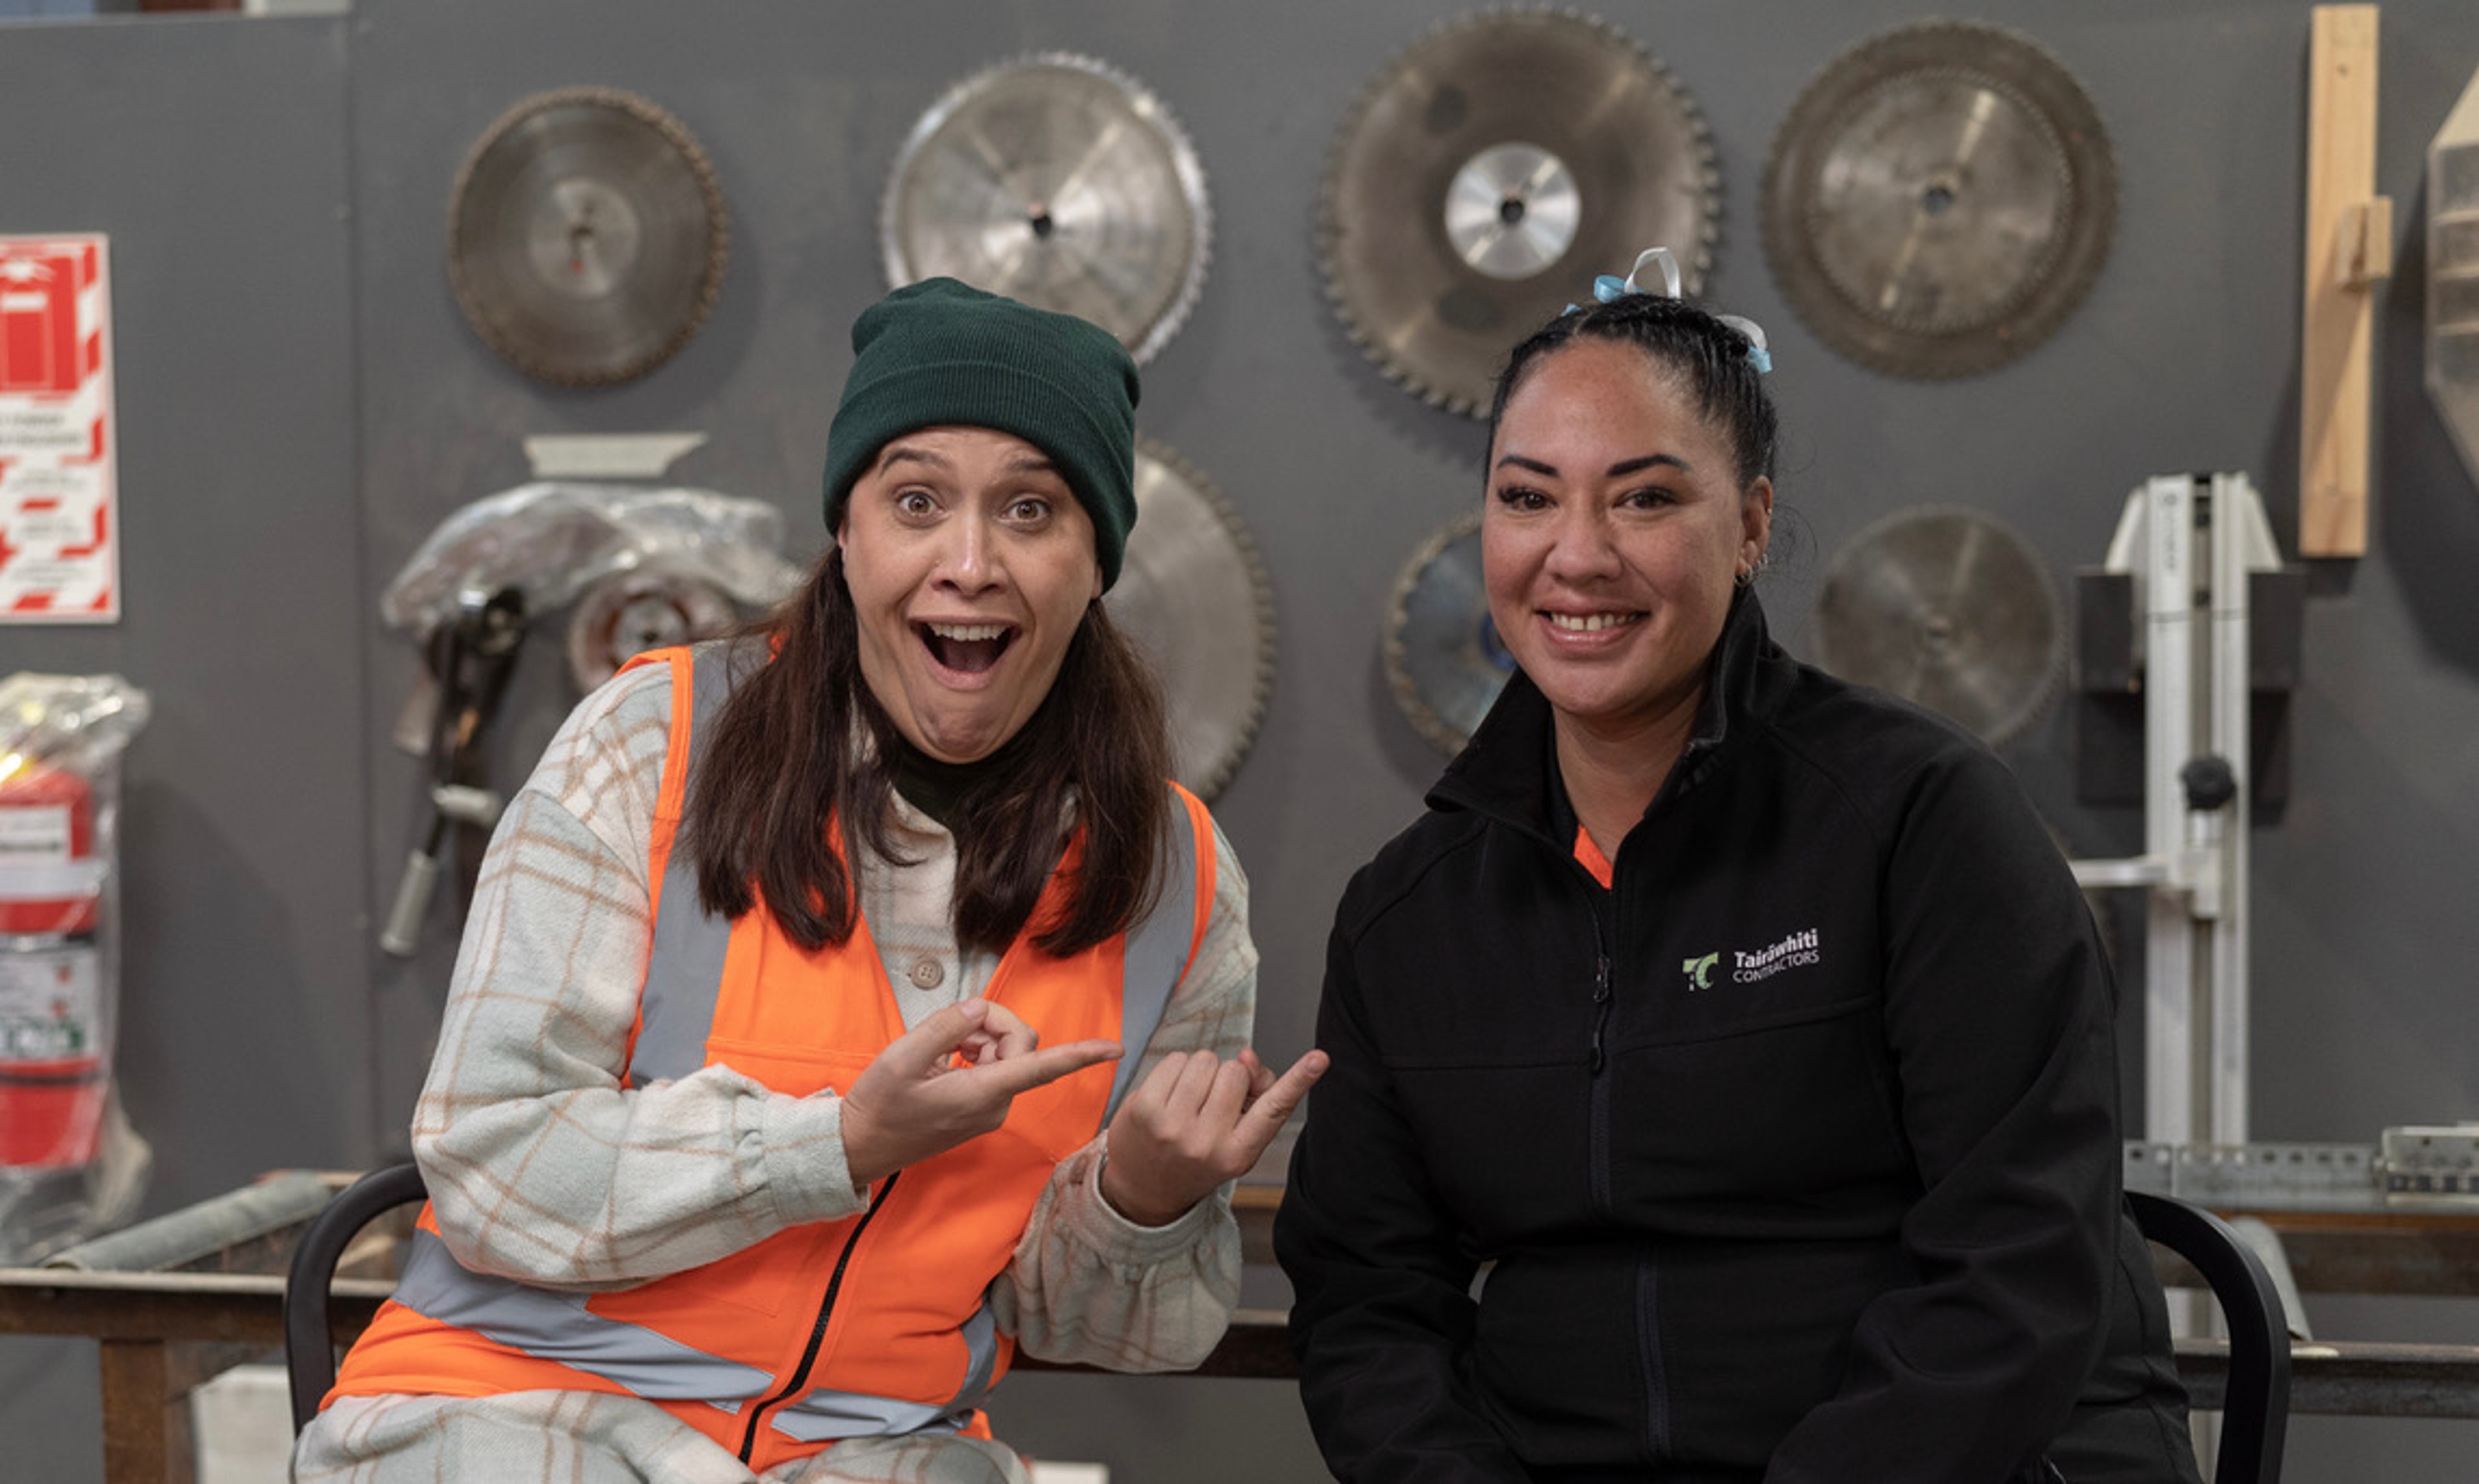 Kura excitedly points to Managing Director of Tairāwhiti Contractors, Kat Kaiwai